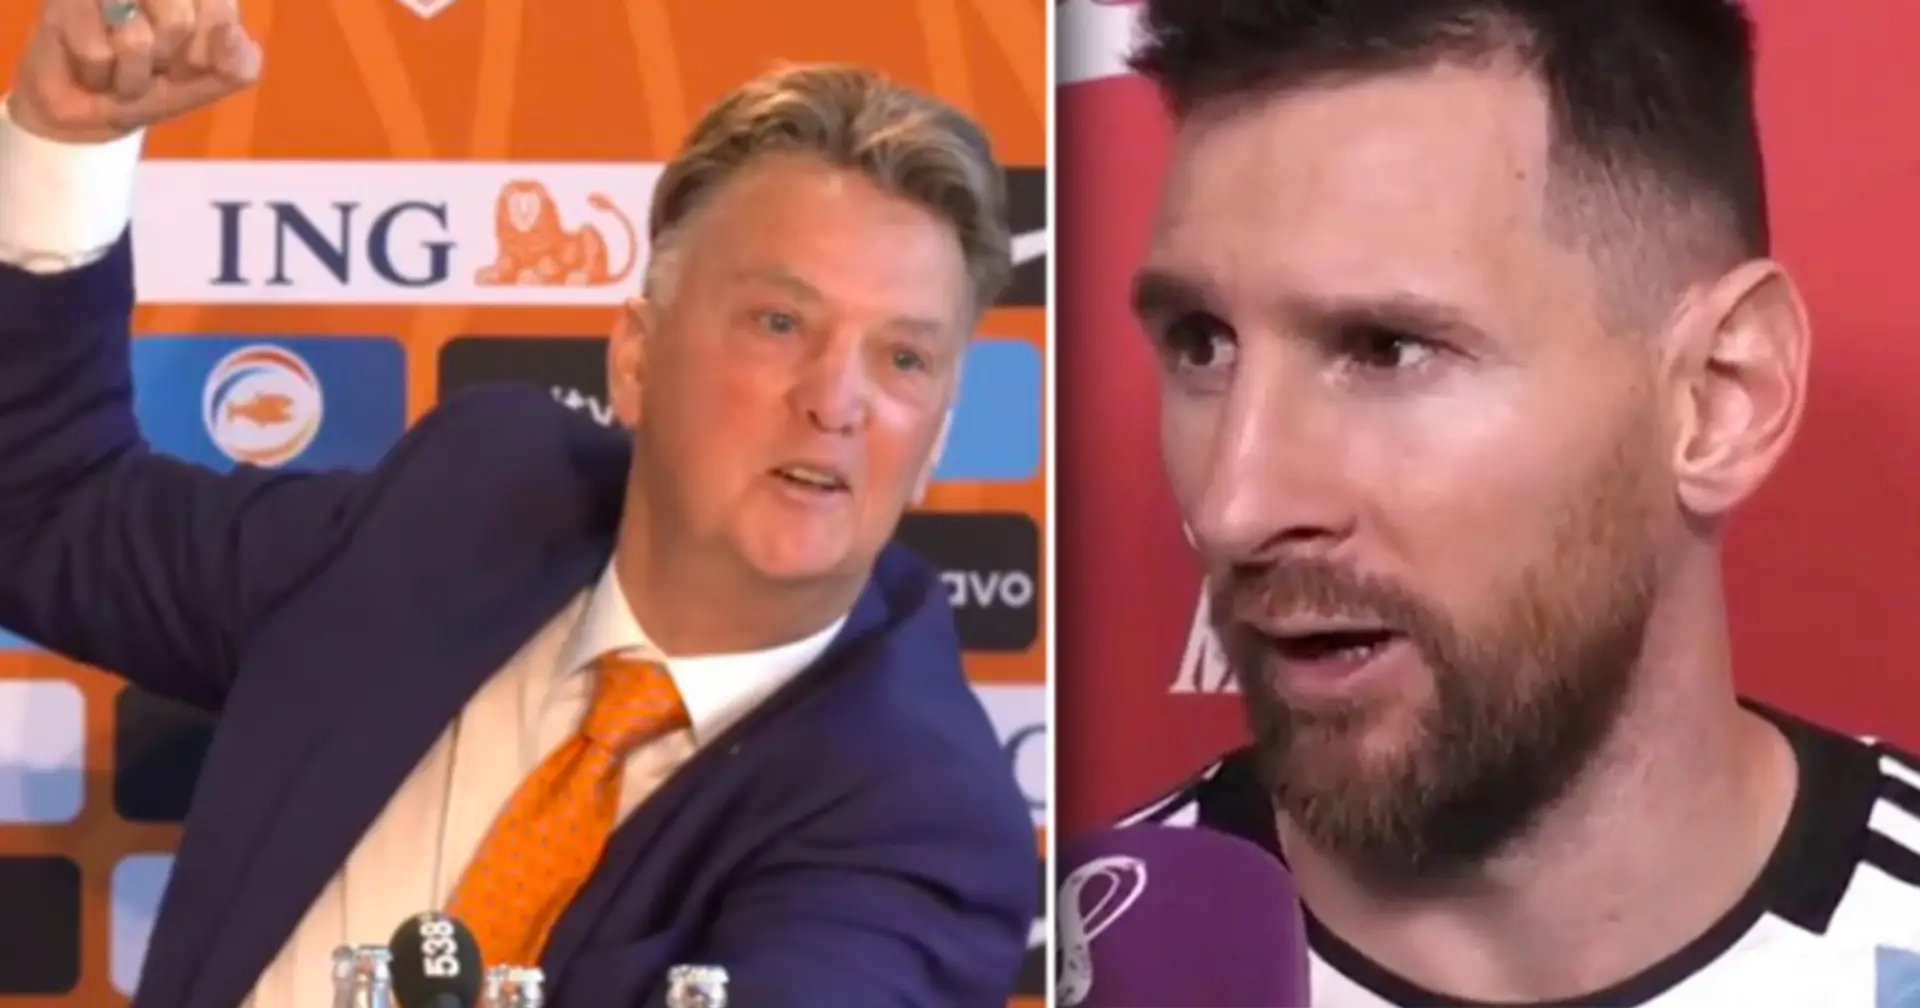 'I feel disrespected': Messi hits out at Van Gaal after the Netherlands win